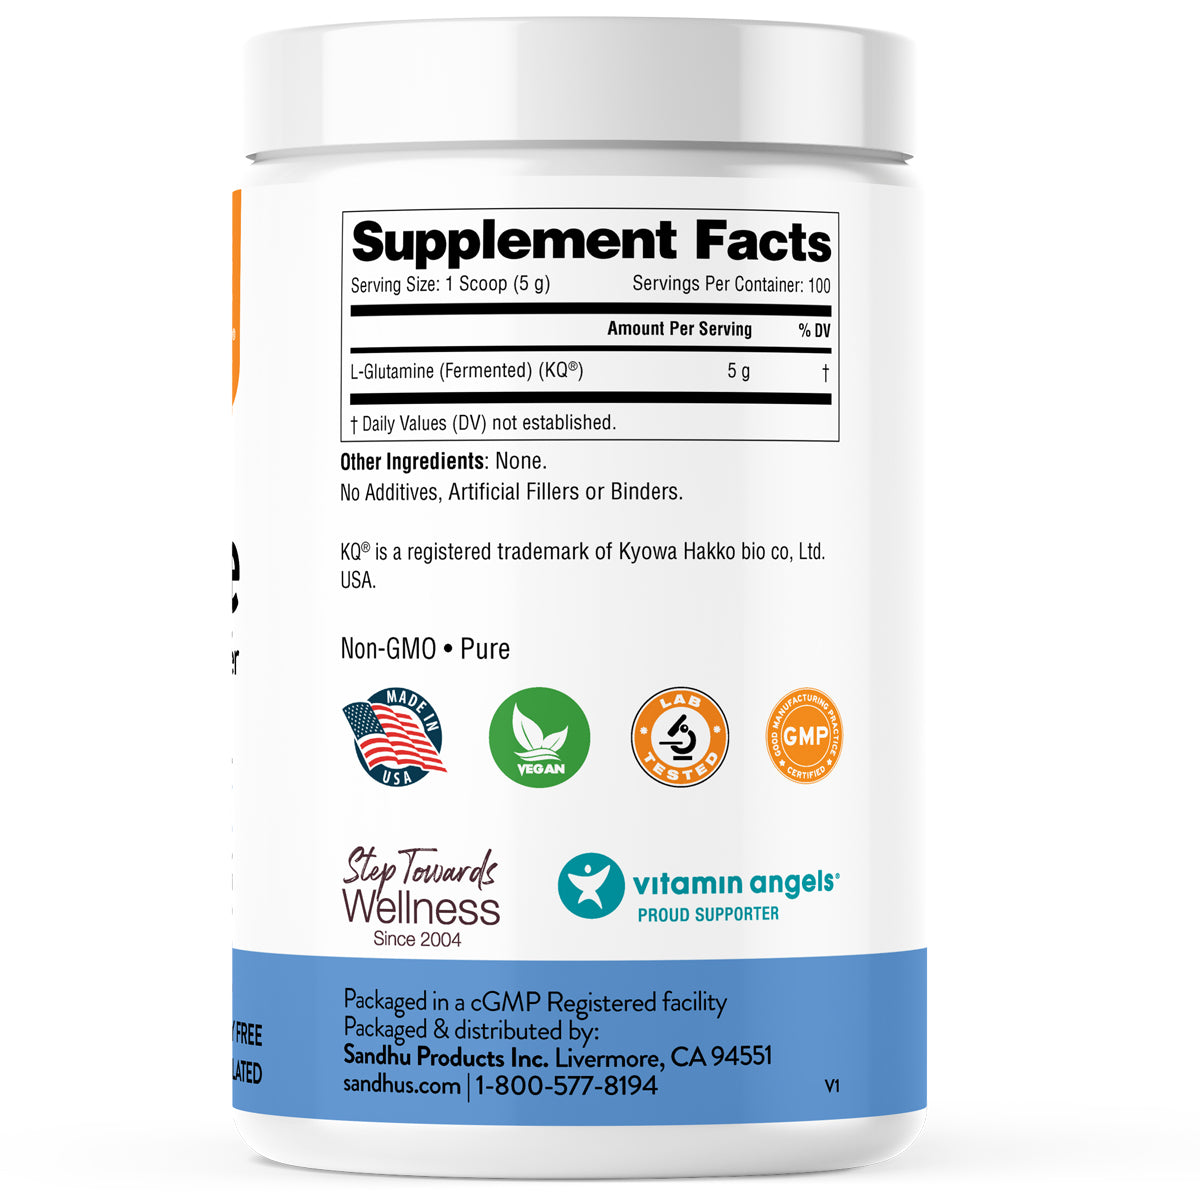 best l glutamine	l glutamine powder	l glutamine weight loss	l-glutamine powder	best l glutamine for gut health	